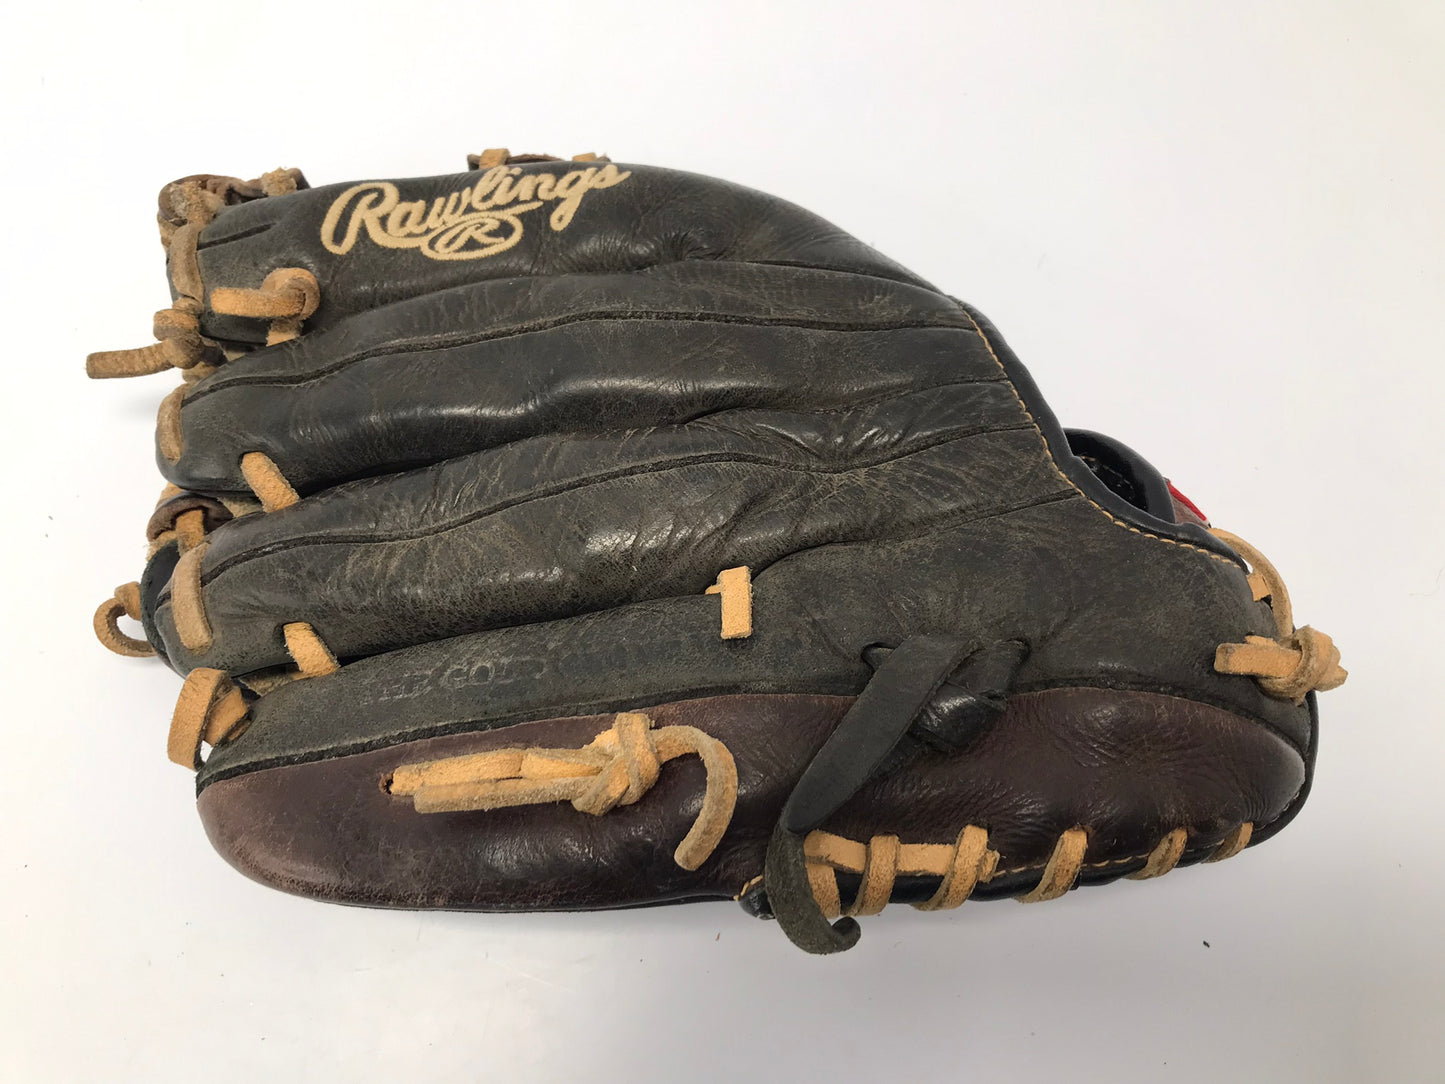 Baseball Glove Adult Size 11.5 Rawlings Gold Glove Leather Black Brown Fits Left Hand Outstanding Quality